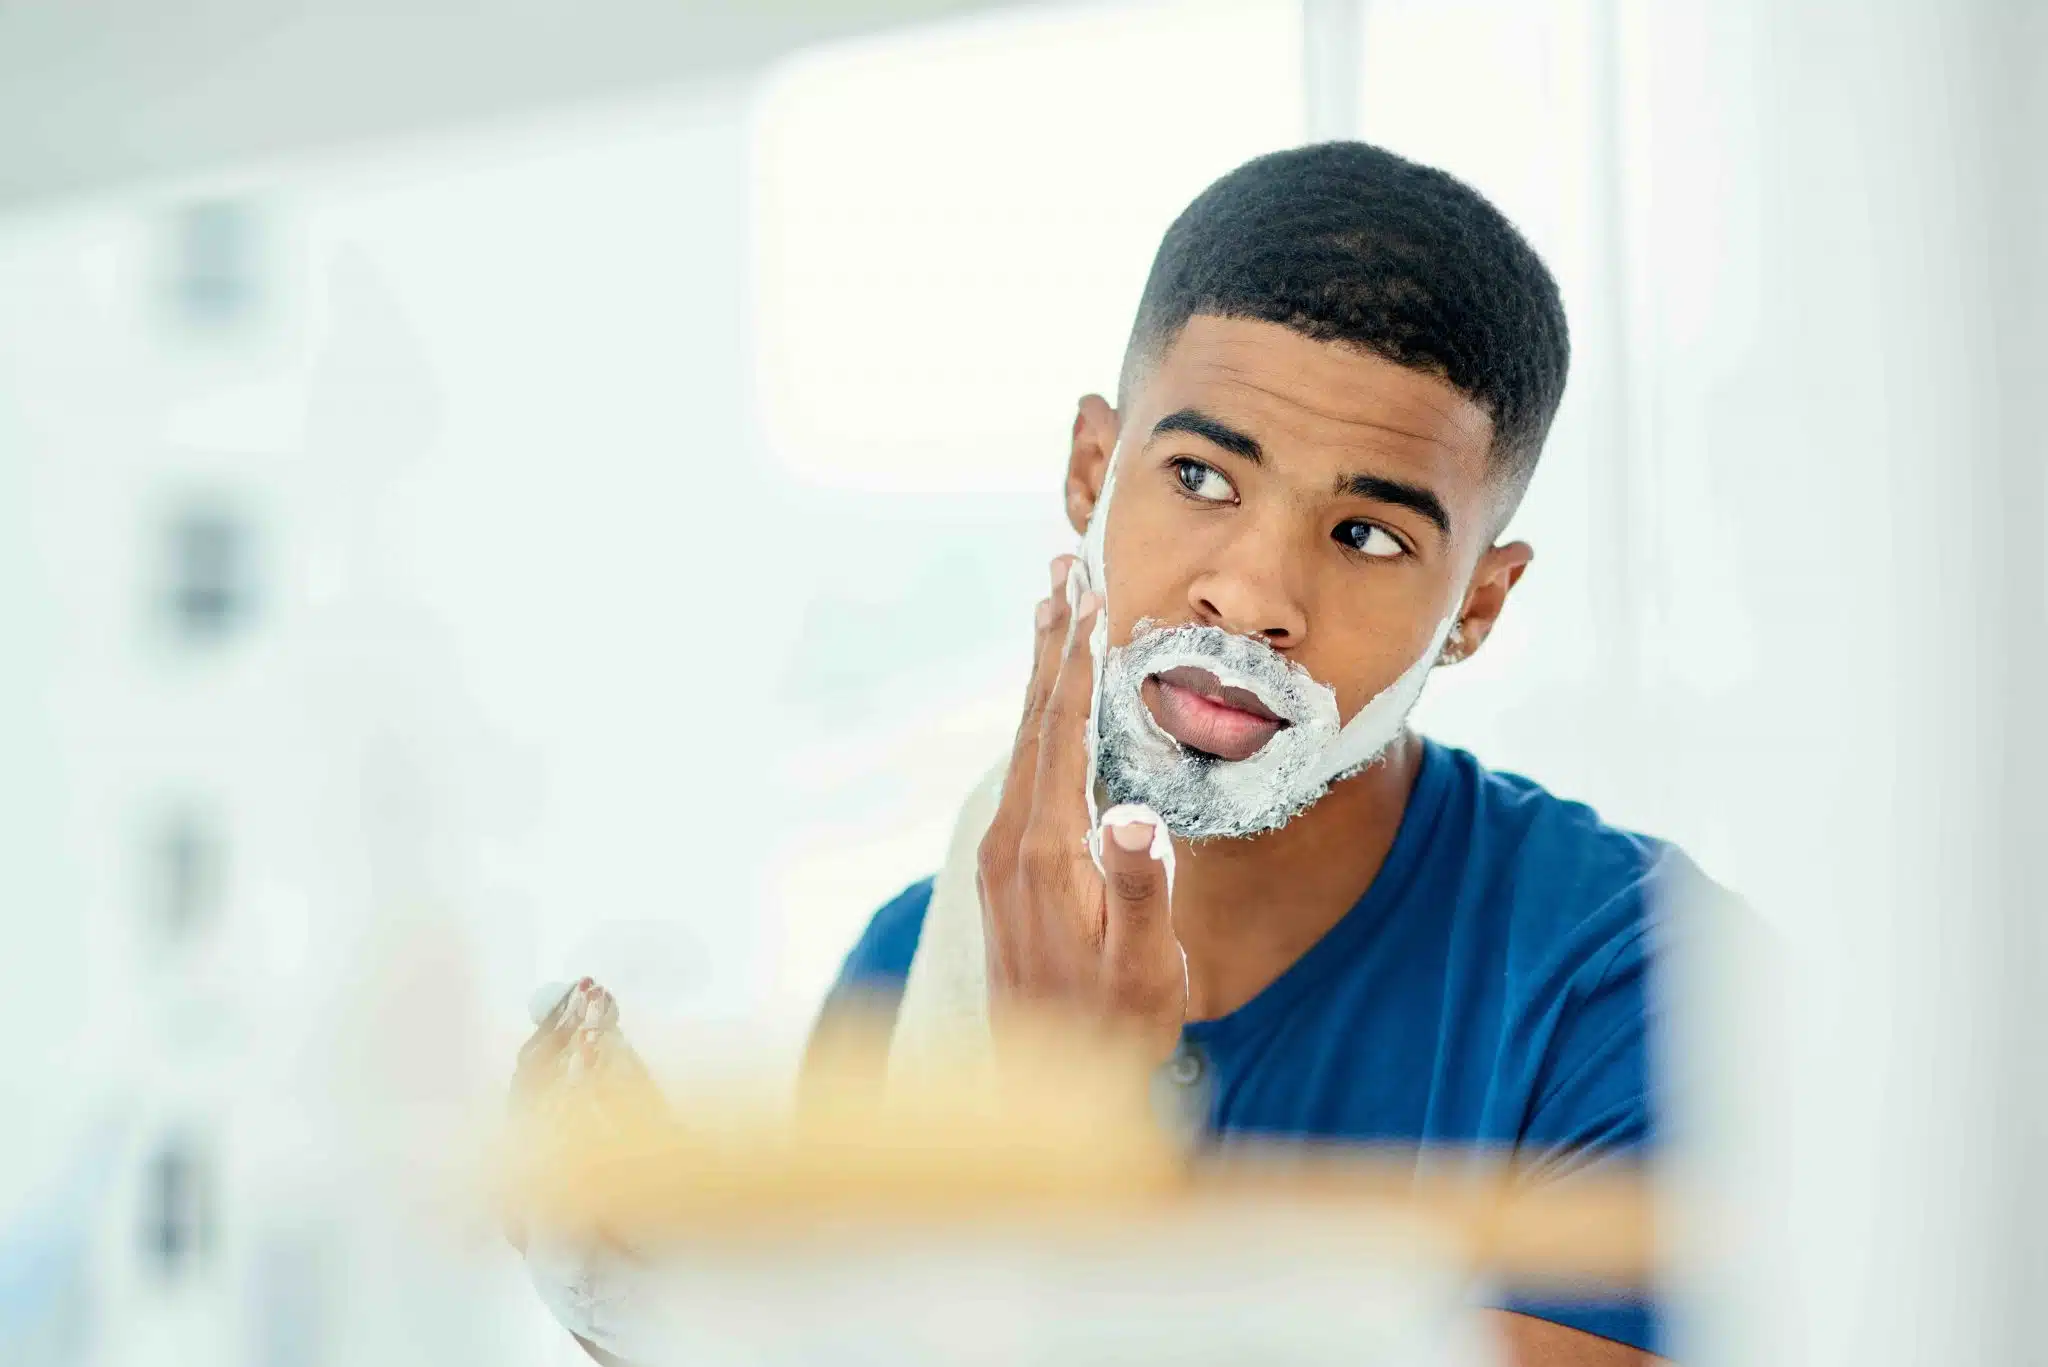 shaving,wet shaving,wet shave,art of shave,shaving with soap,shave with razor,shaving products